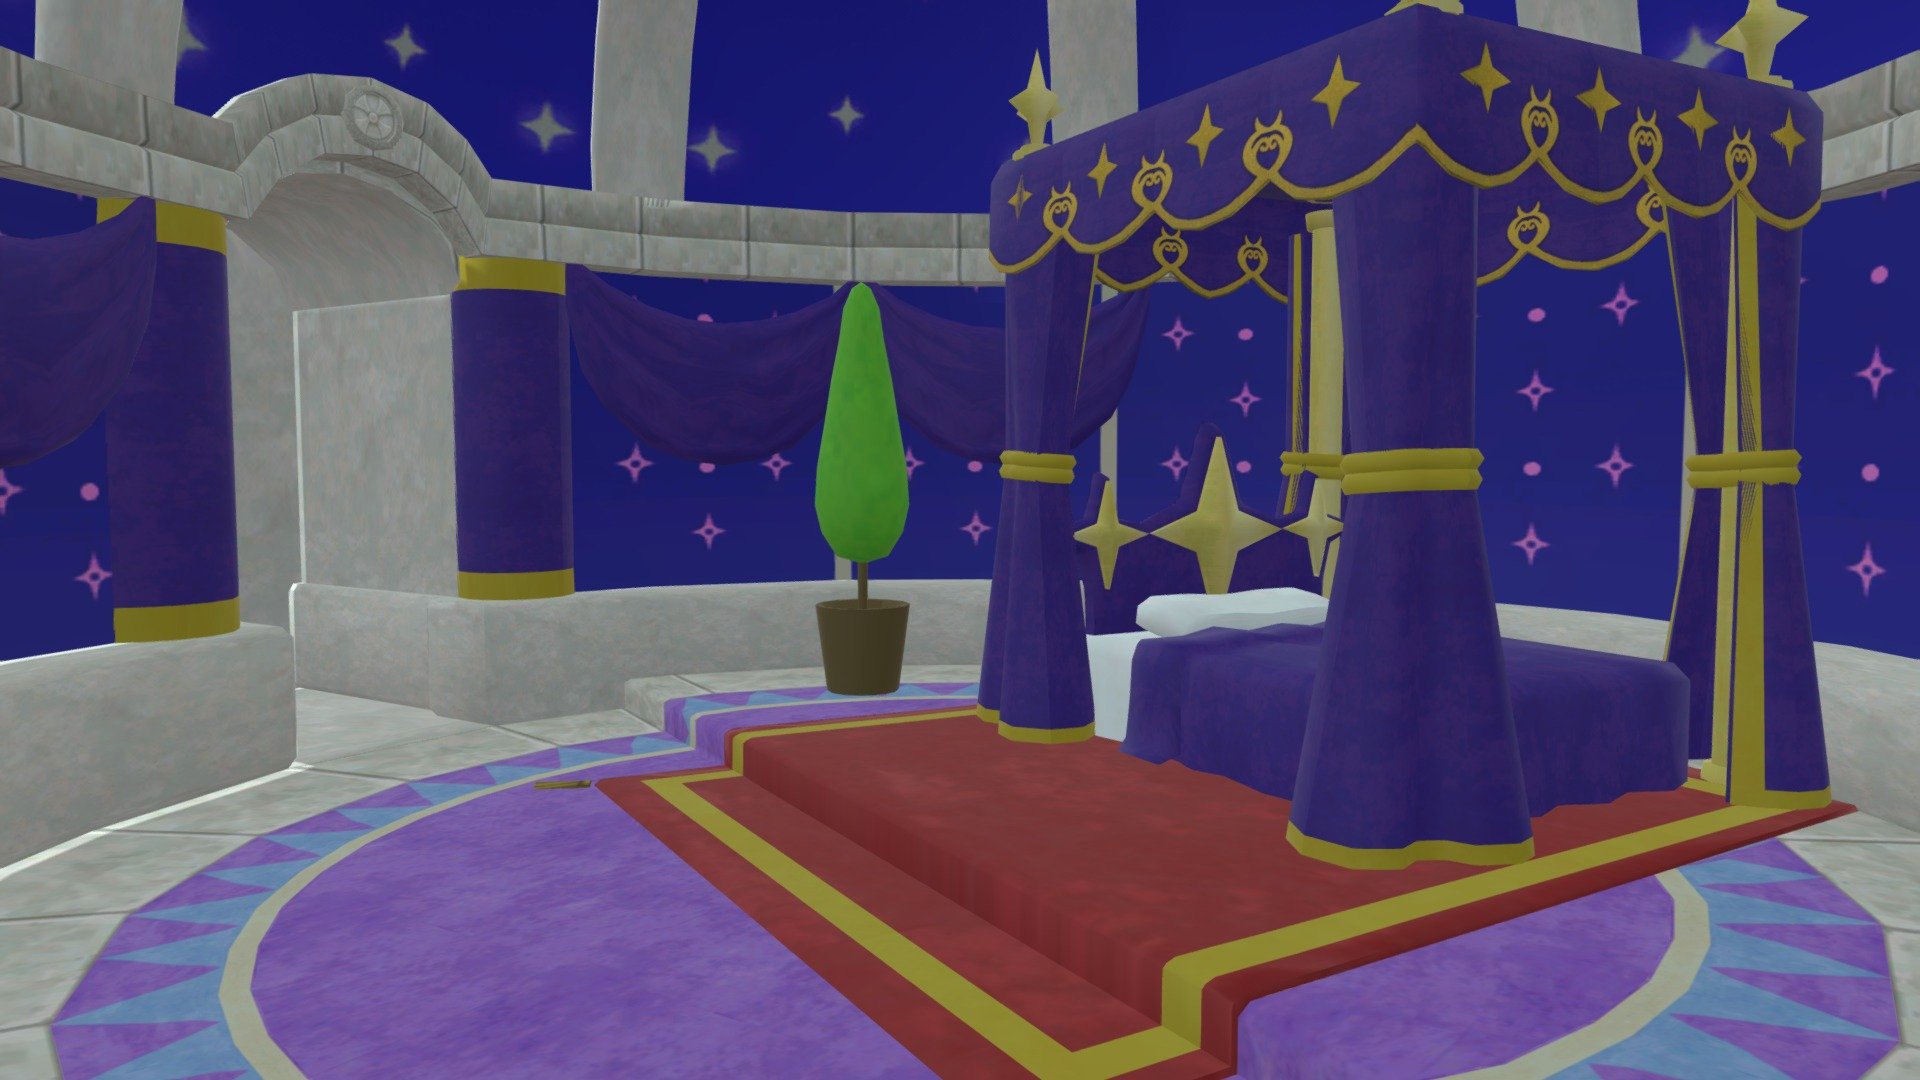 I don't own anything from this model - Wii - Super Mario Galaxy - Bedroom - Download Free 3D model by Garu (@Garu.The.Ninja) 3d model